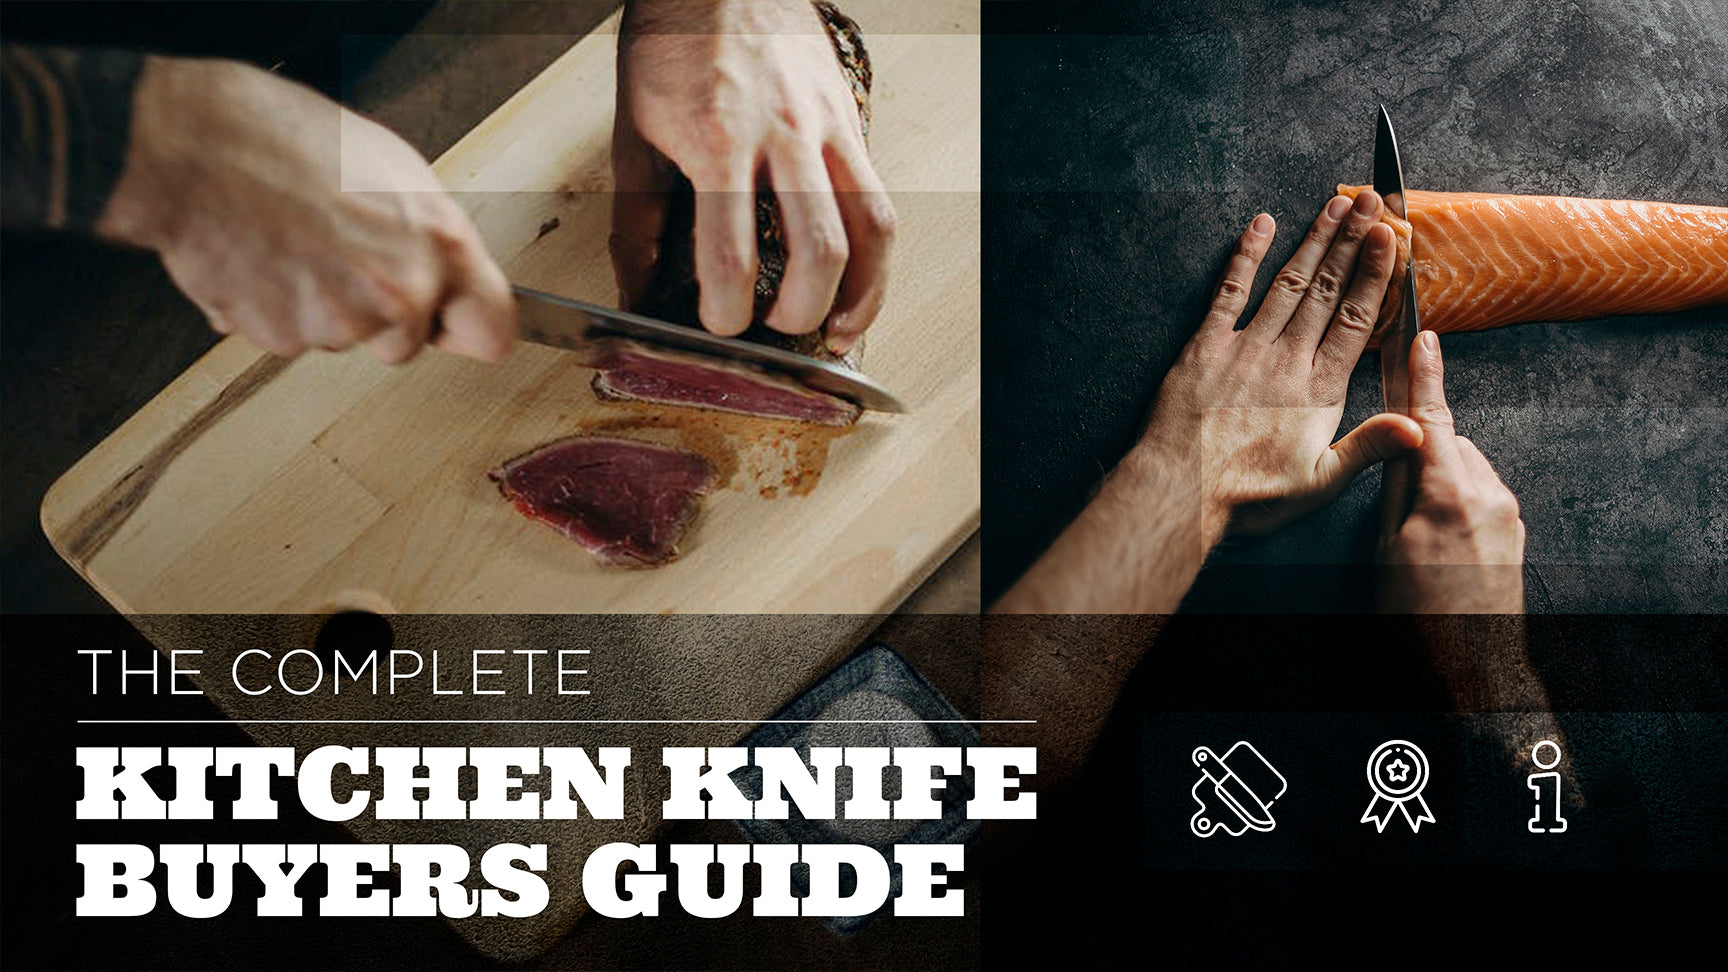 Our Most Trusted Butcher Knives – The Bearded Butchers